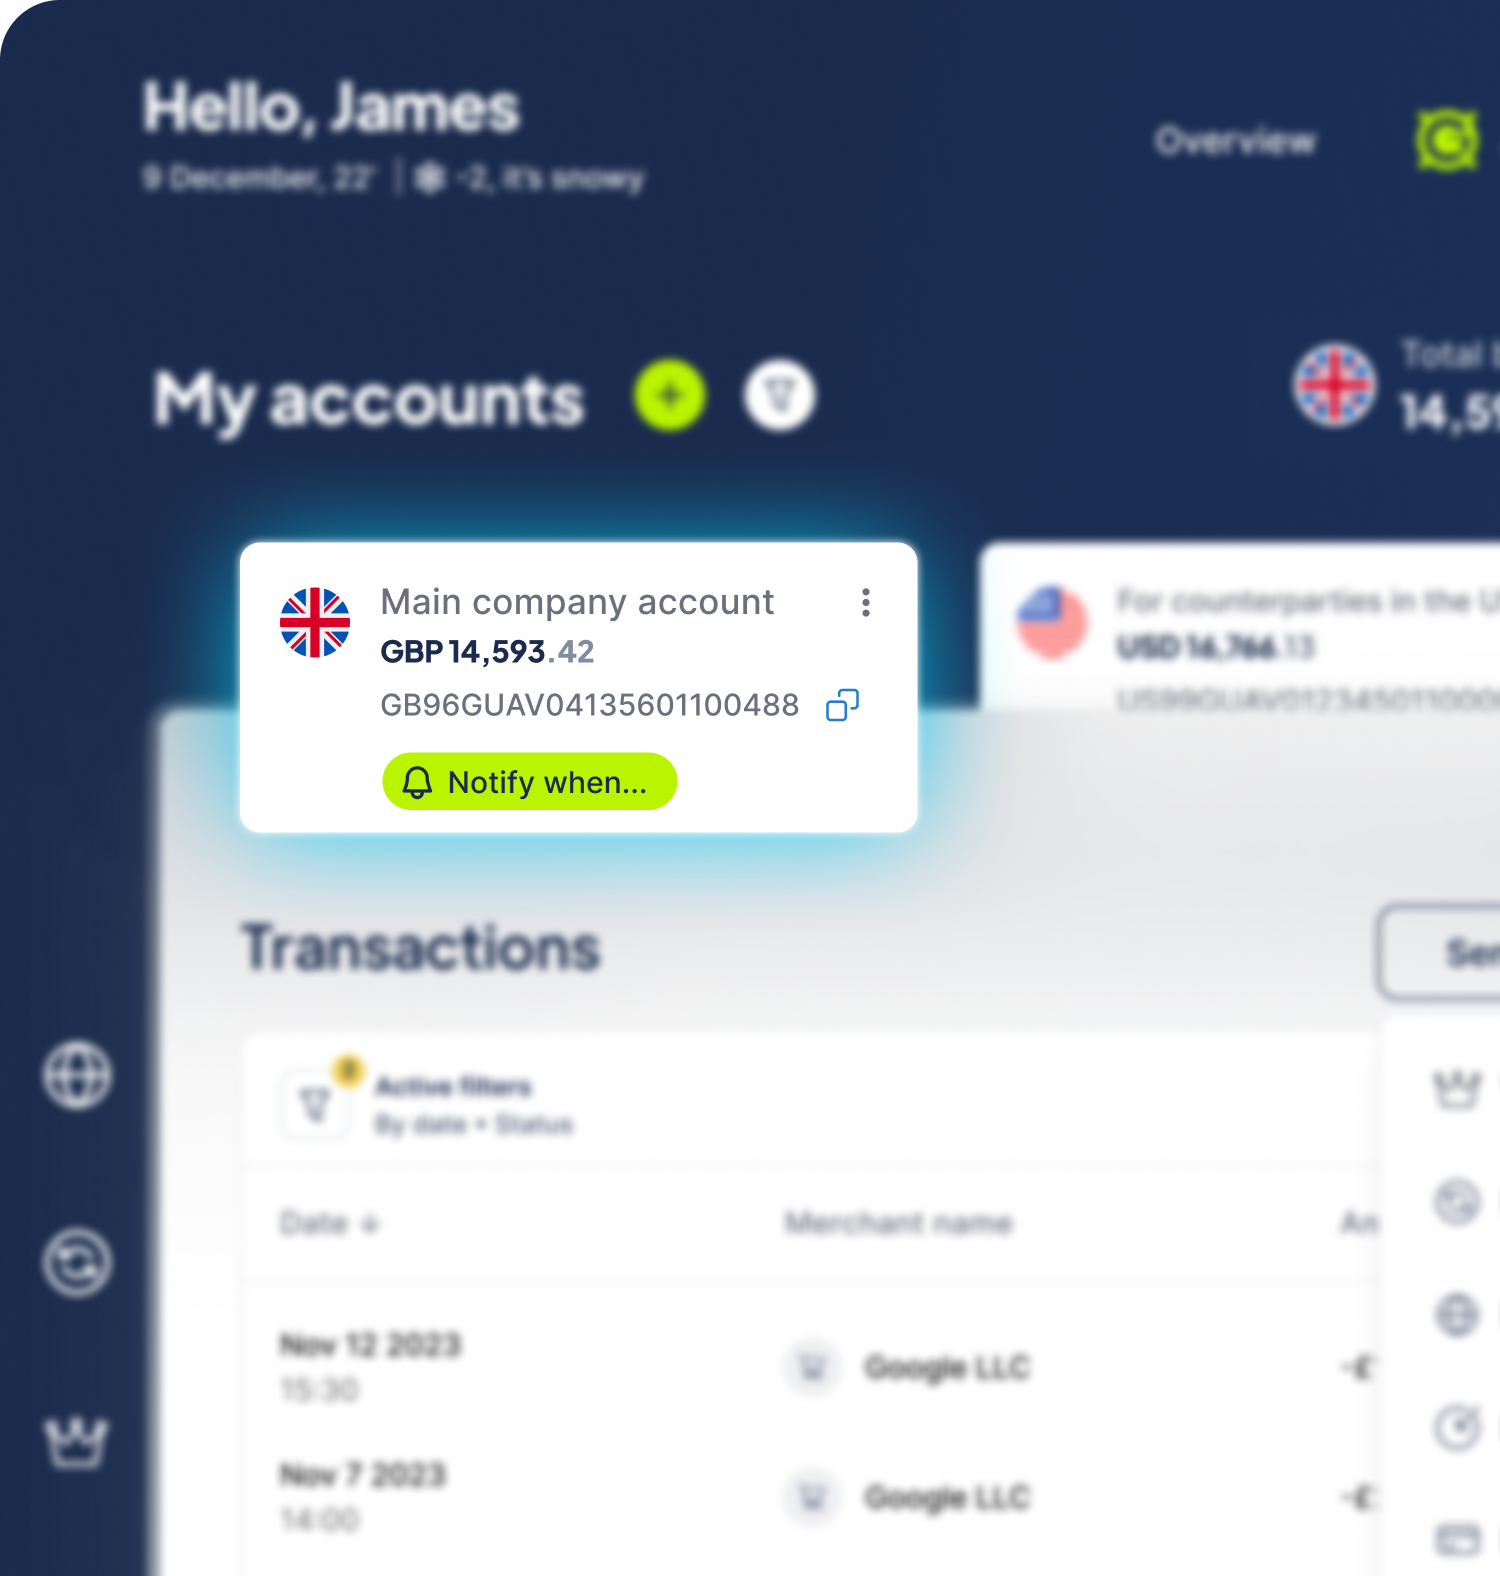 Snapshot of MyGuava Business Account Interface with Multiple Accounts and Transaction Records, enabling efficient global payment management